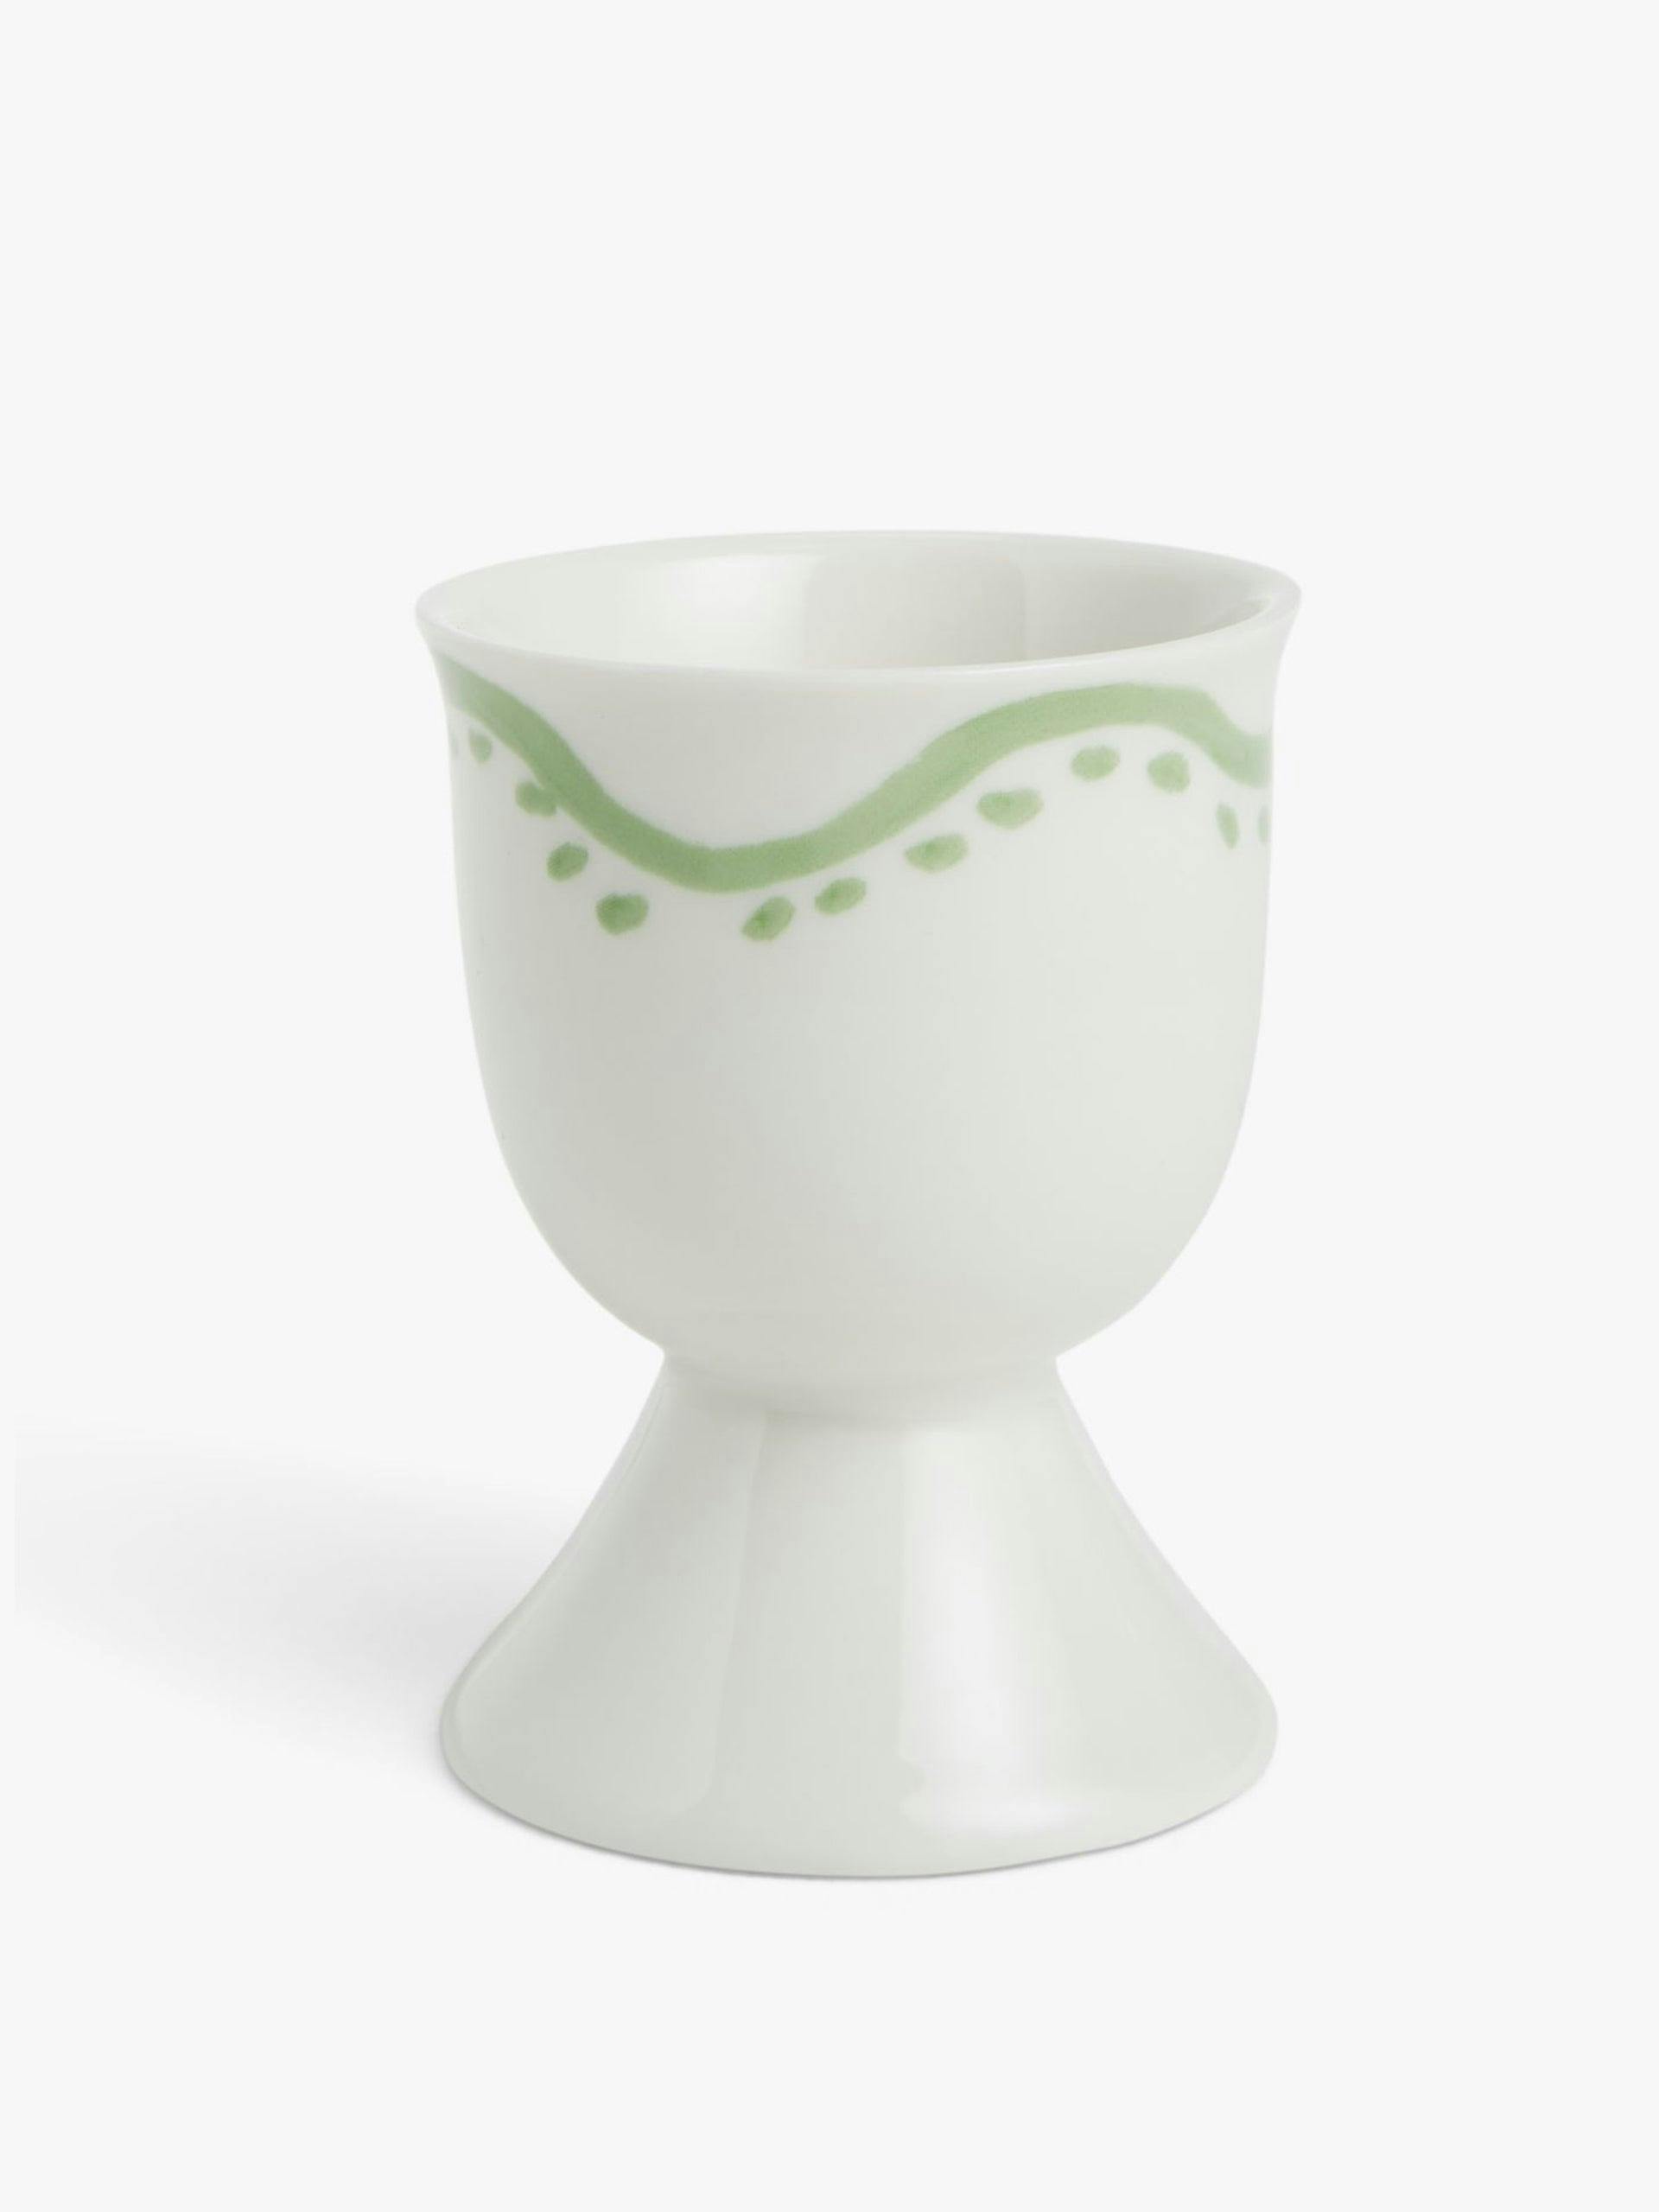 Fine china egg cup